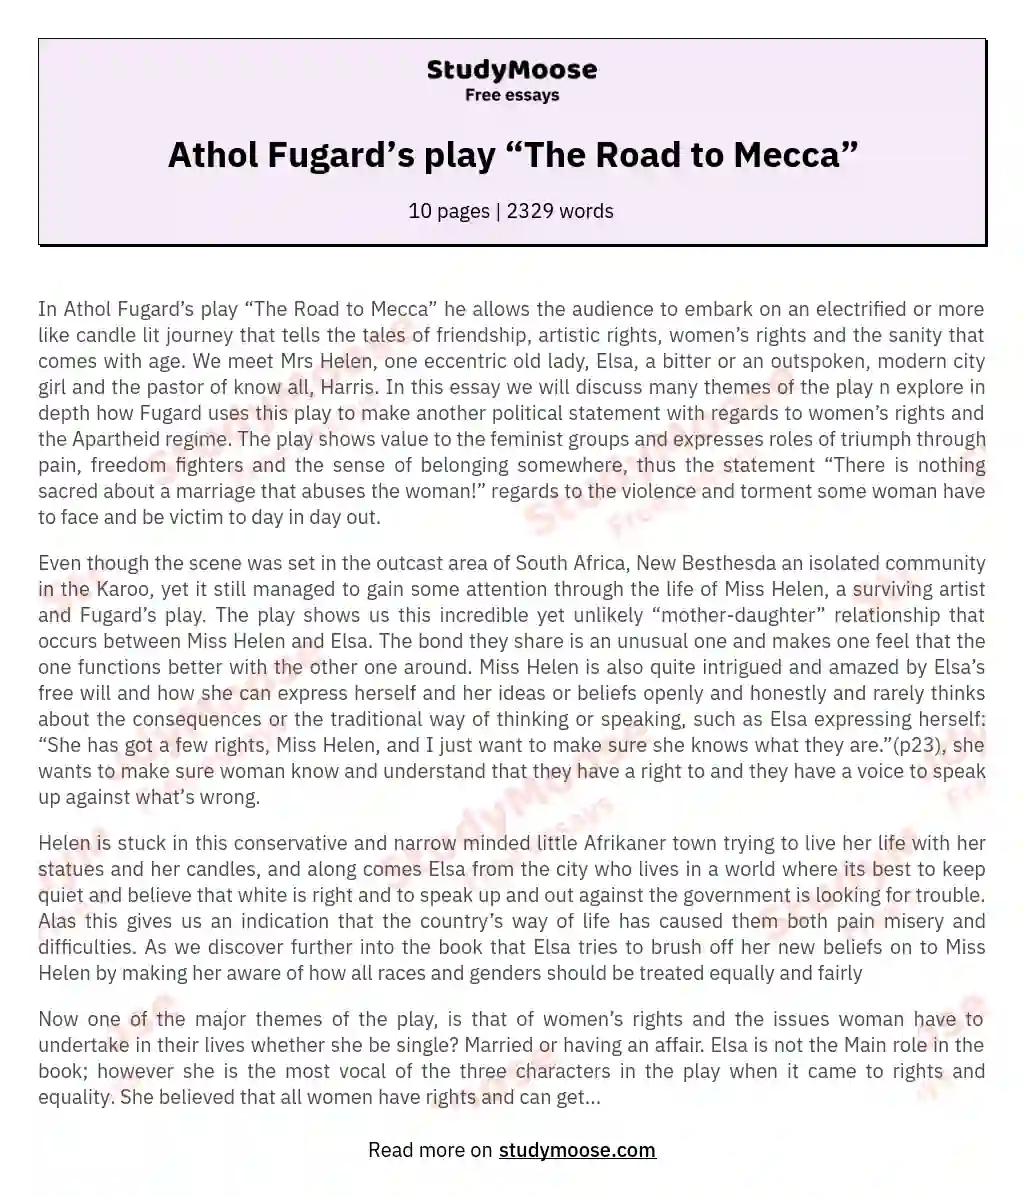 Athol Fugard’s play “The Road to Mecca” essay